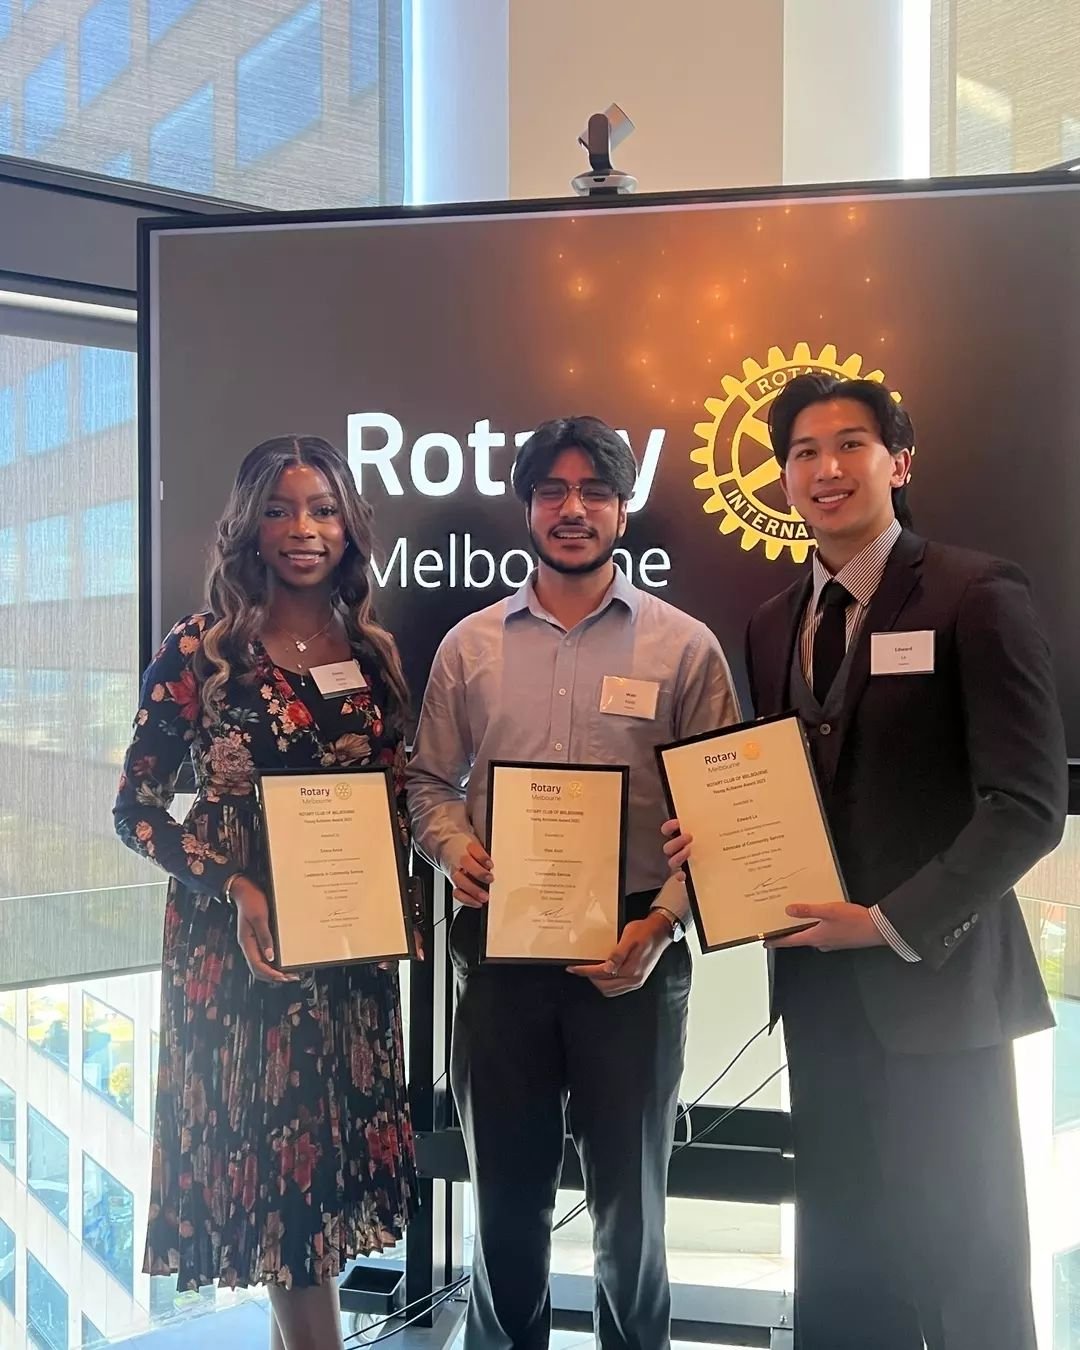 Congratulations to the winners of The Rotary Club of Melbourne&nbsp;Young Achievers Award!&nbsp;🏆 👏&nbsp;

Wasi and Edward, both Western Chances scholarship recipients, were recognised for their excellence in their academic pursuits and signifcant 